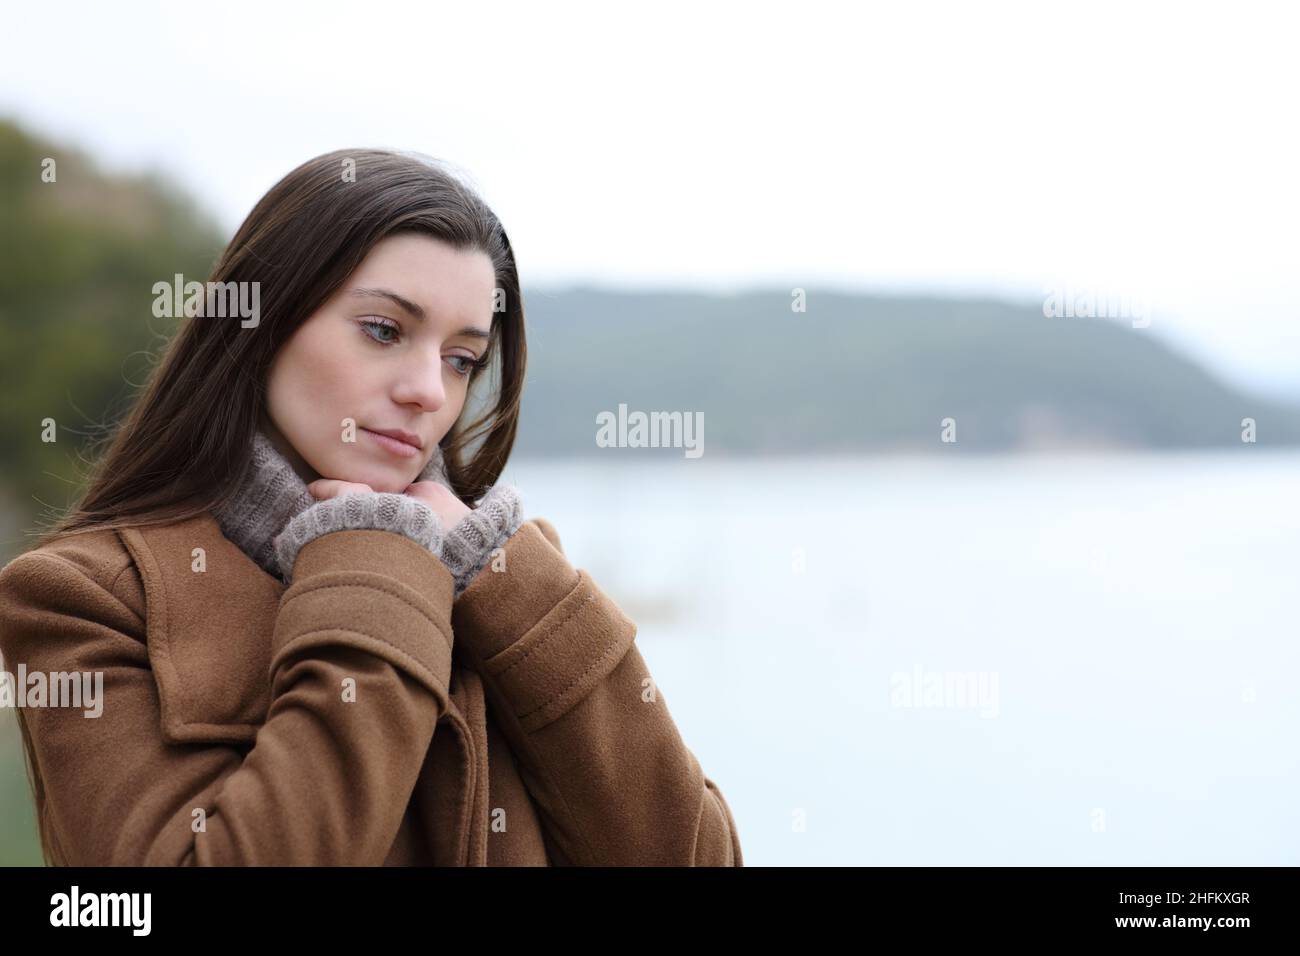 Pensive woman in winter thinking in a lake looking down Stock Photo